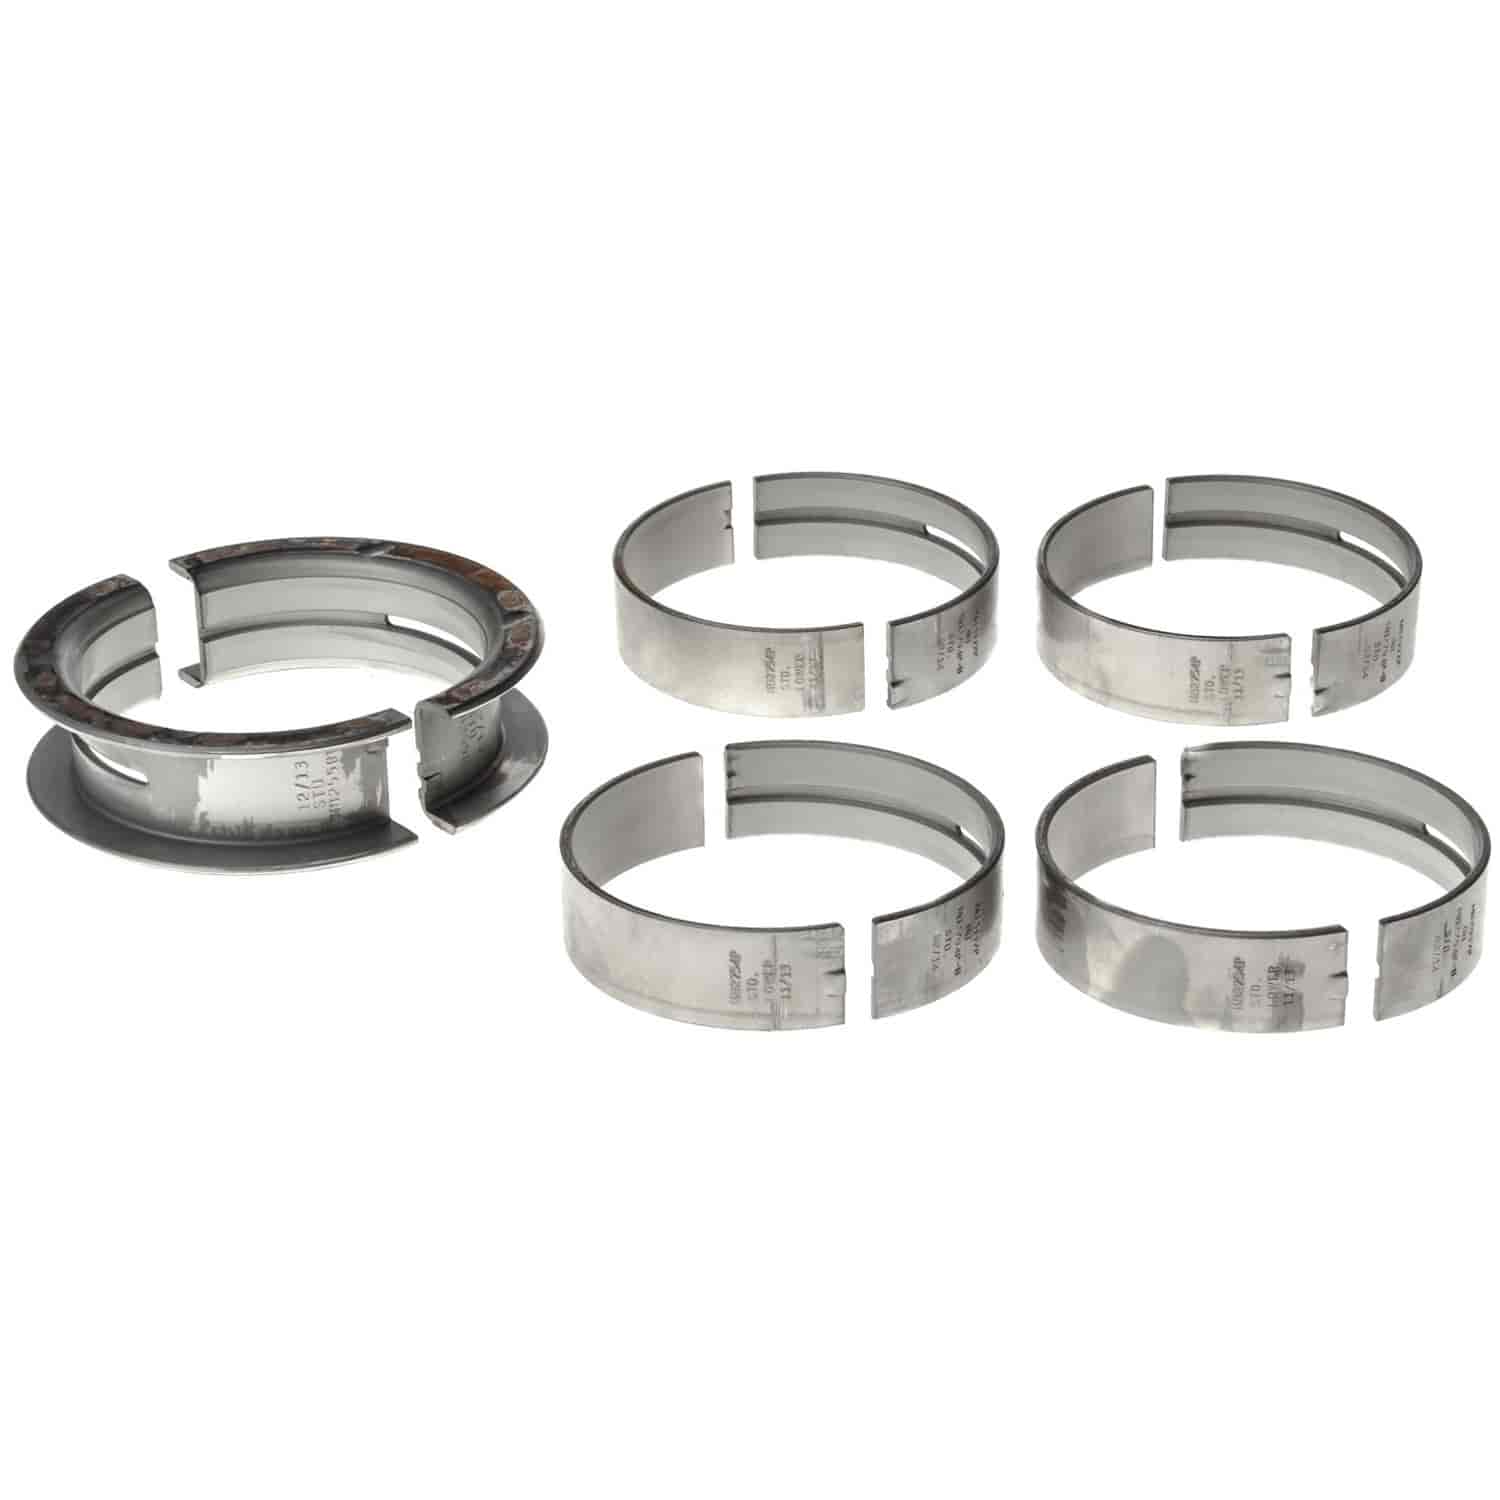 Main Bearing Set Ford 1971-1997 V8 351W/351M/400 (5.8/6.6L) with -.030" Undersize